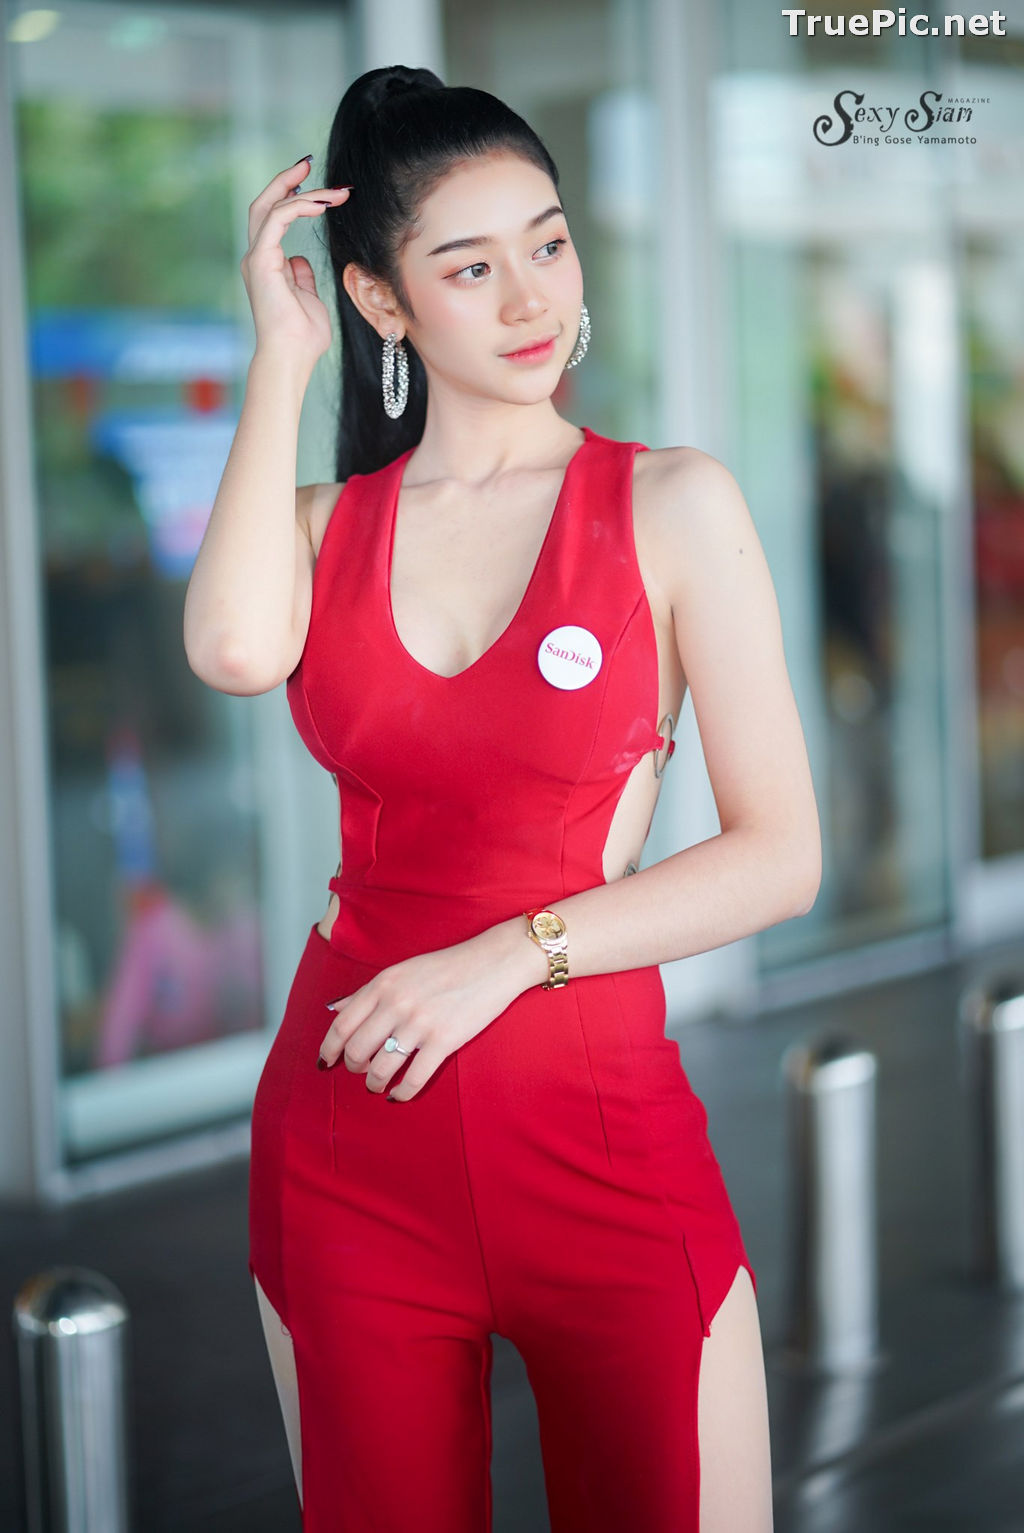 Image Thailand Model - วรารัตน์ มงคลทรง - From Red To Heart - TruePic.net - Picture-13